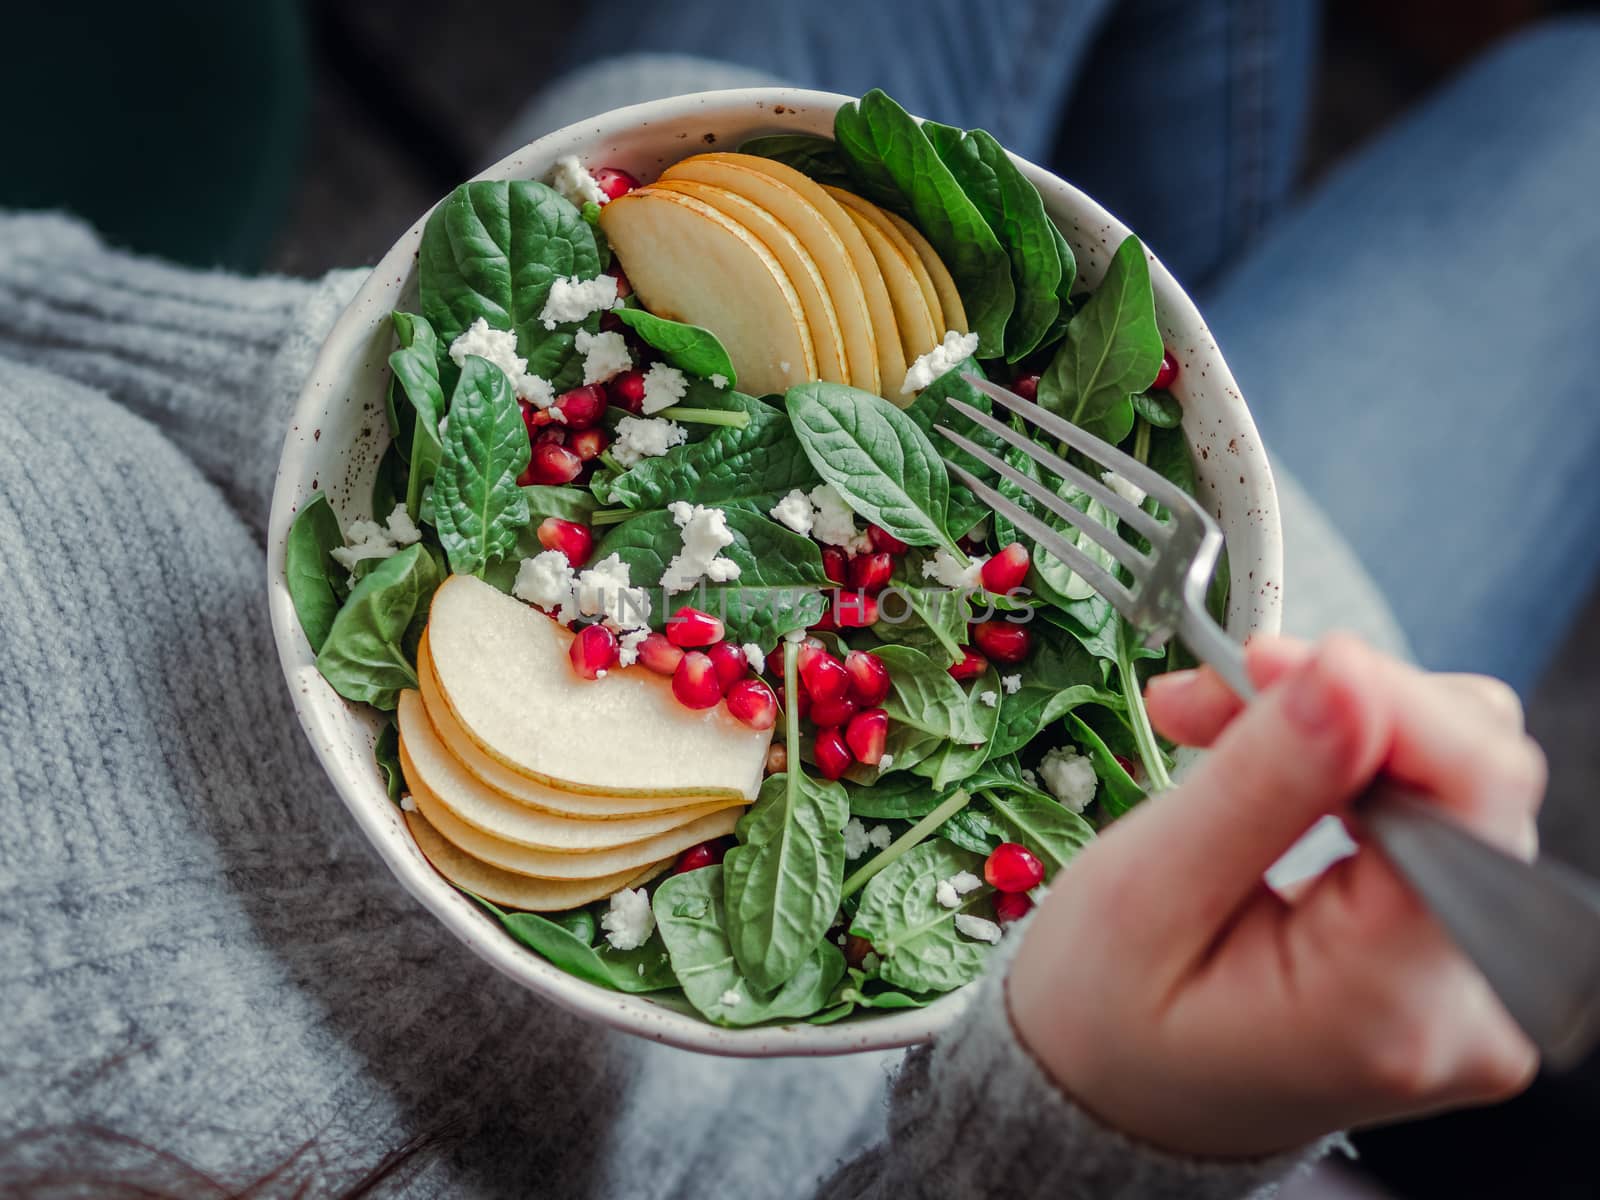 Woman in jeans and sweater holding vegan salad bowl with spinach, pear, pomegranate, cheese. Vegan breakfast, vegetarian food, diet concept. Girl in jeans holding fork with legs, body, hands visible